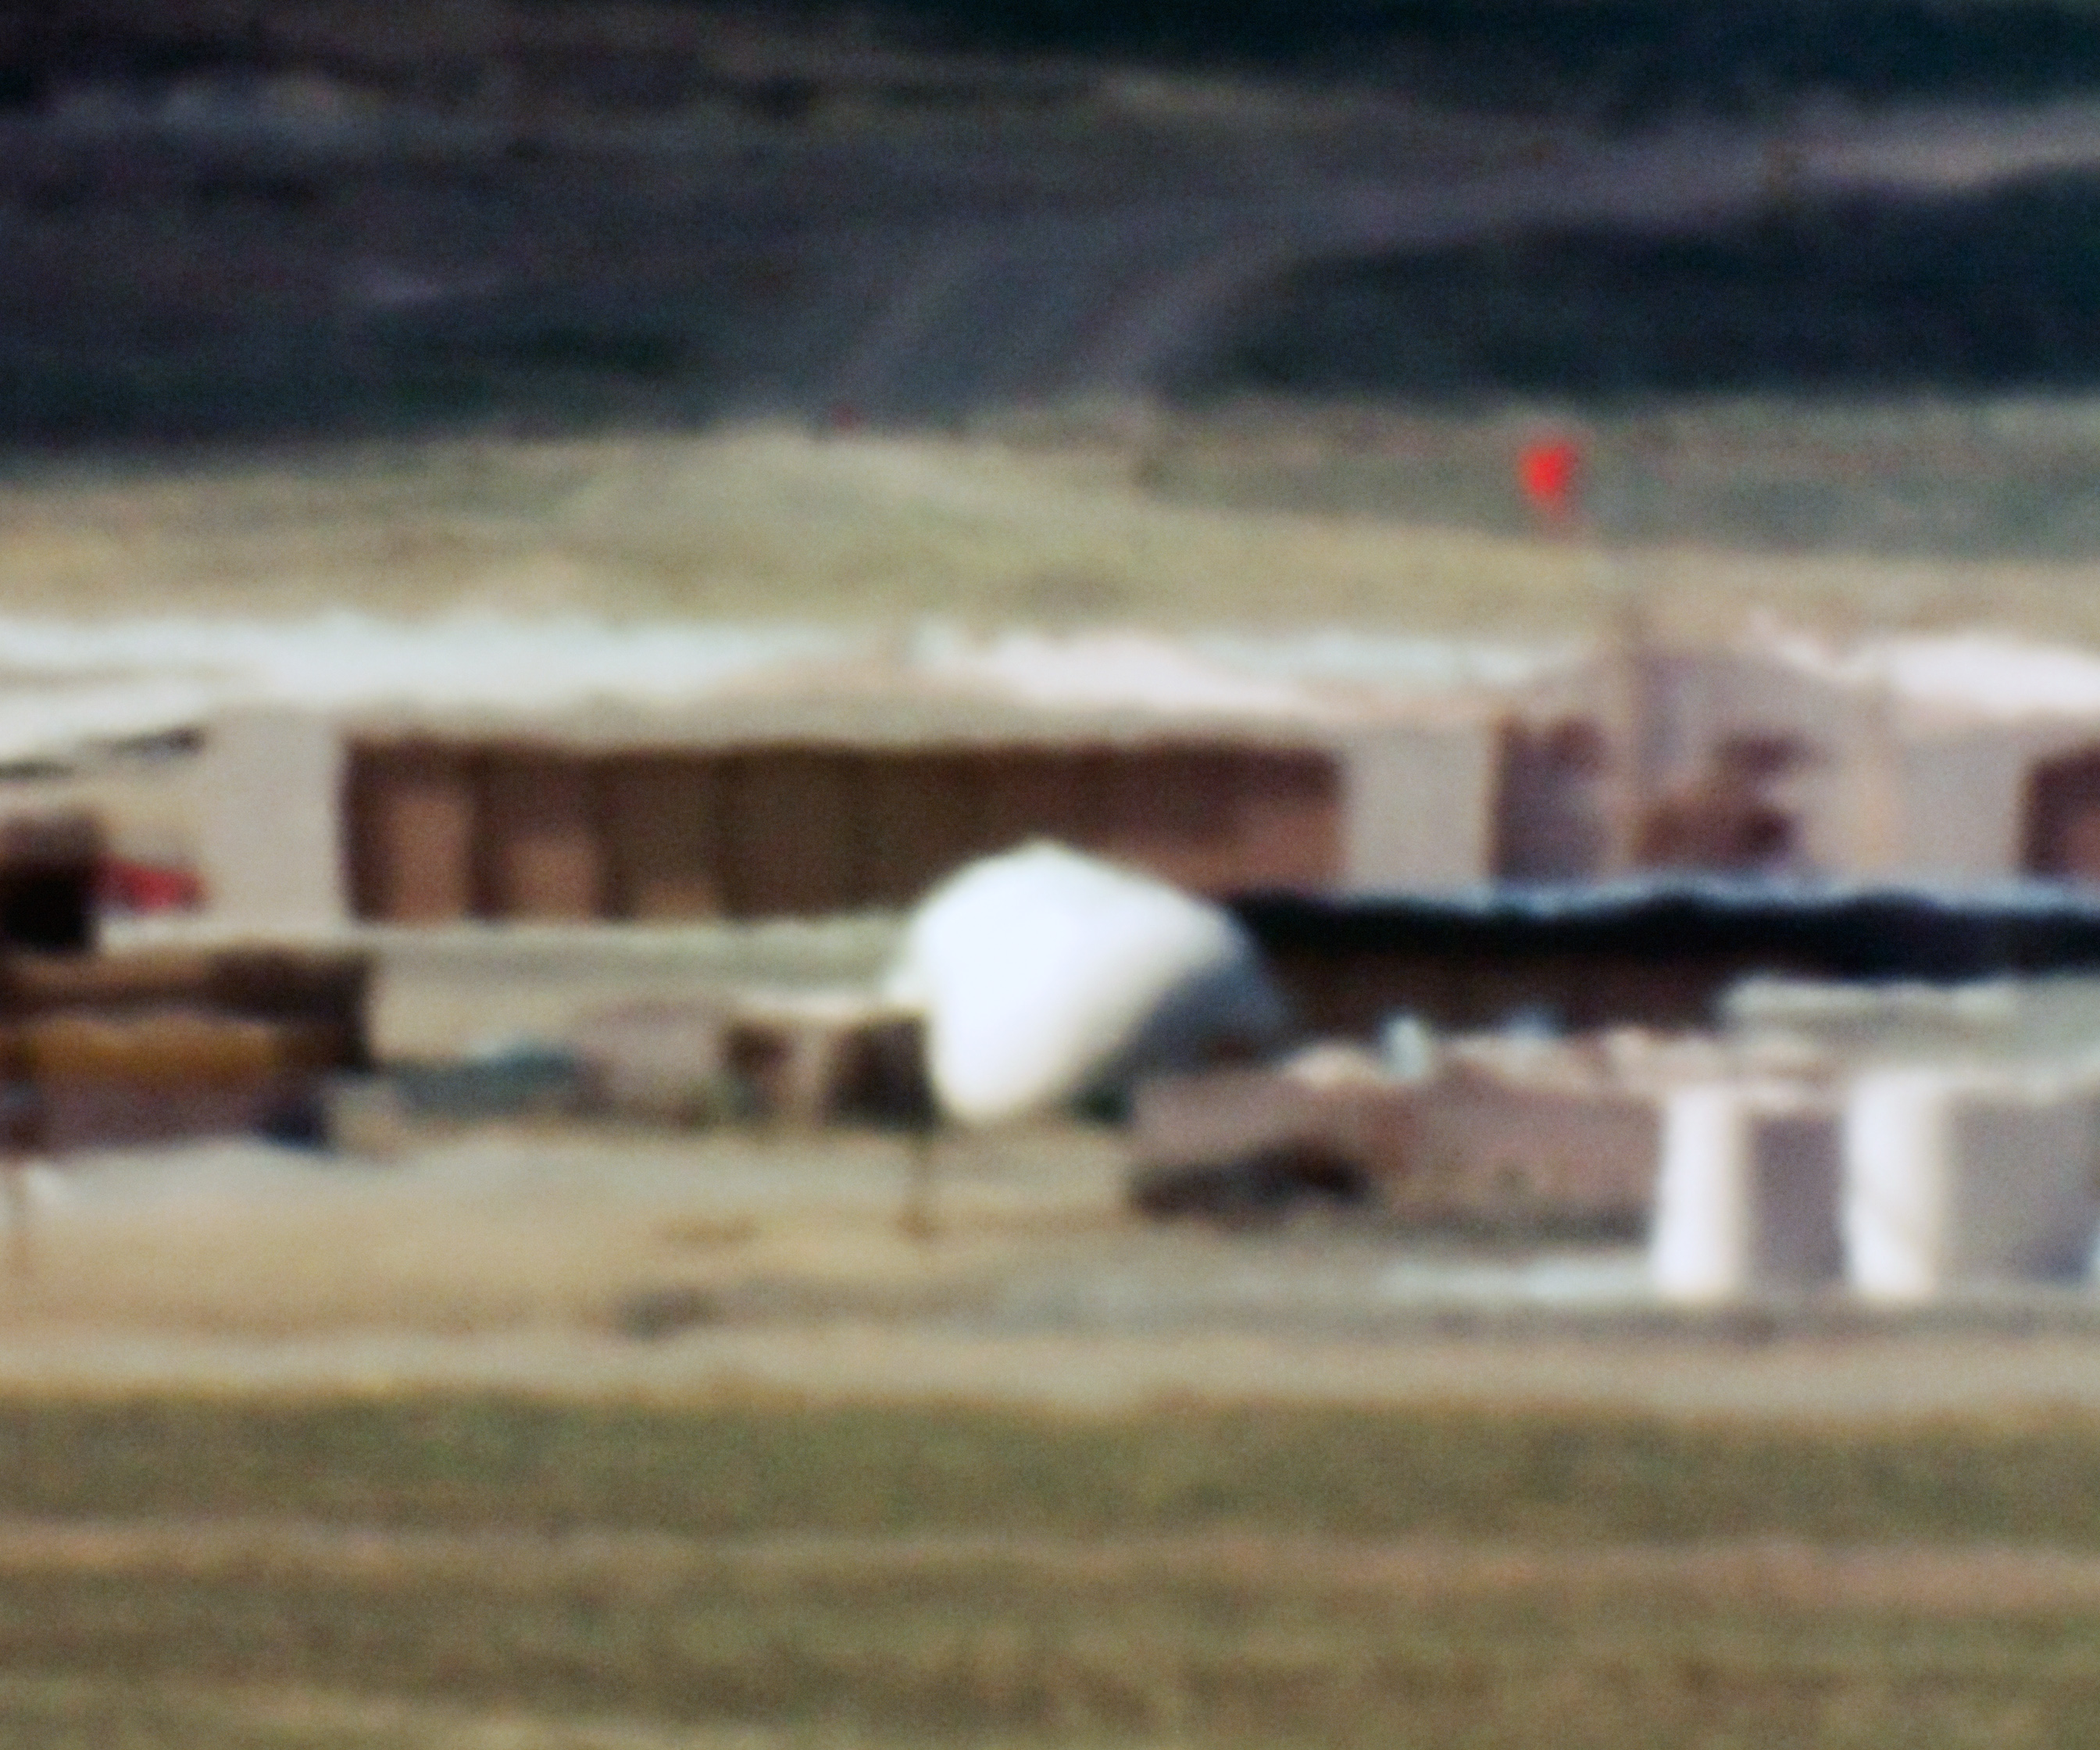 Large Hangars and Fuel Storage; Tonopah Test Range, NV; Distance approx. 18 miles; 10:44 am, 2005